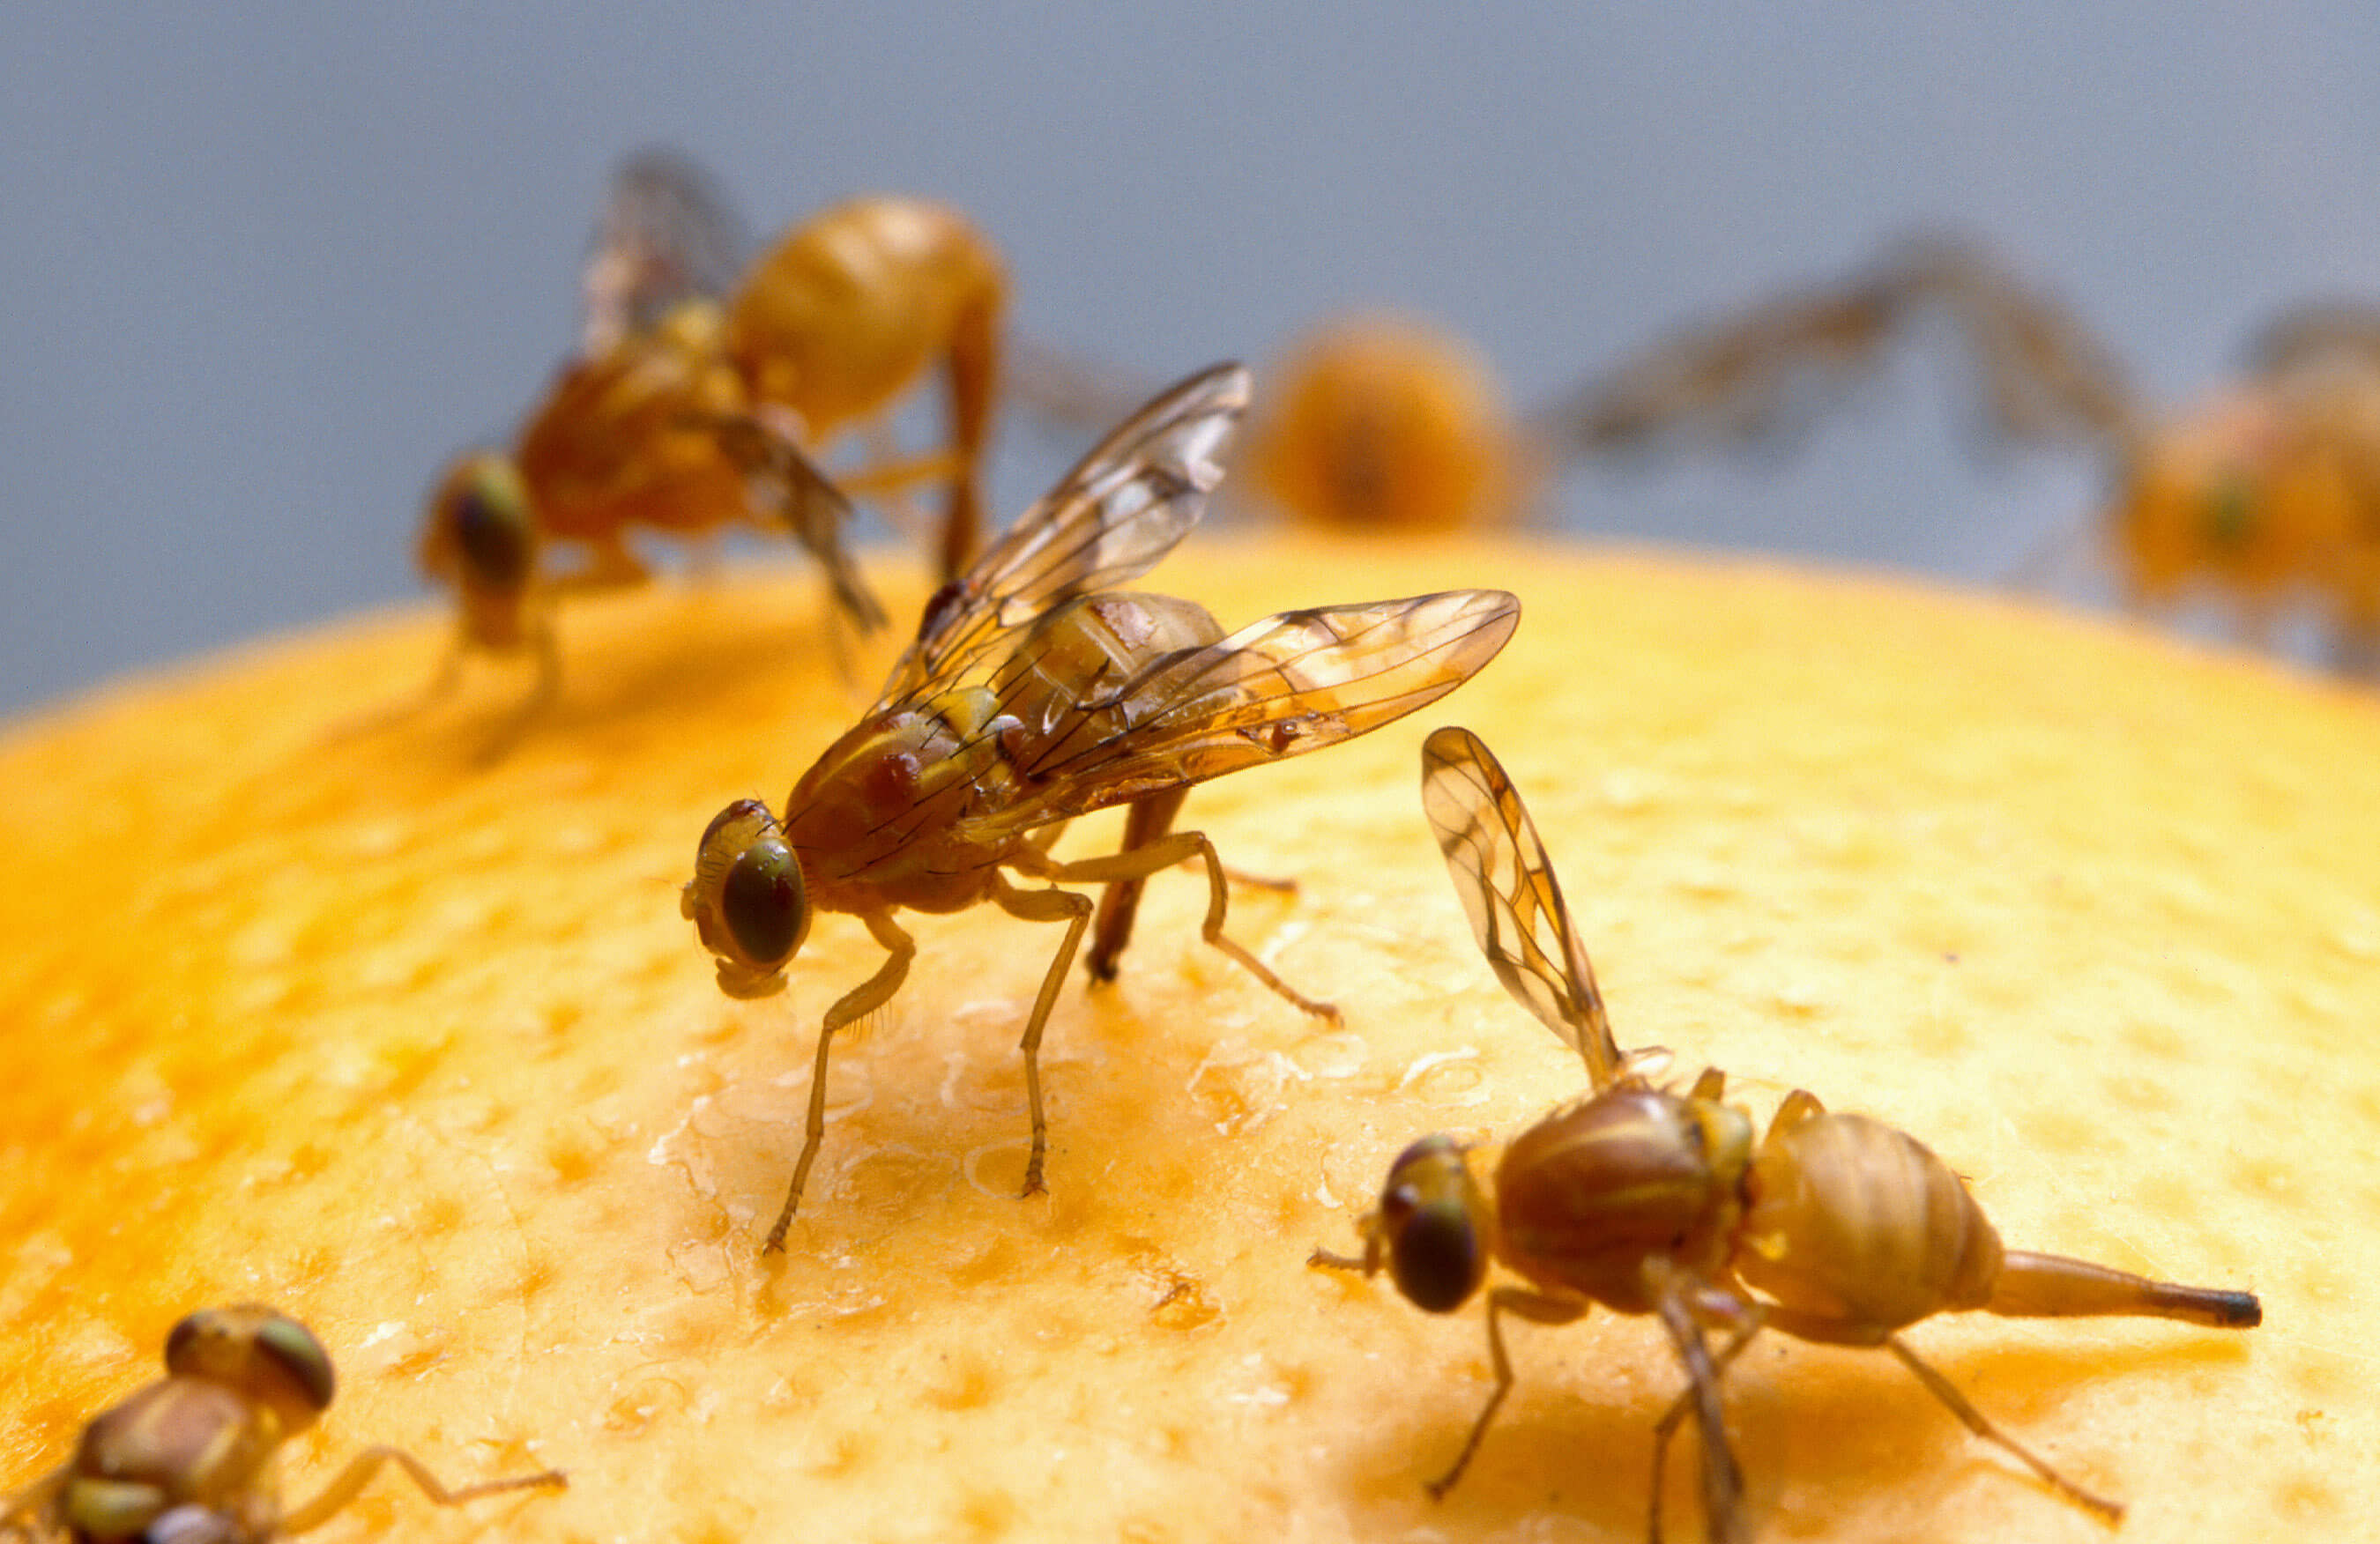 Preference for oranges protects fruit flies from parasites